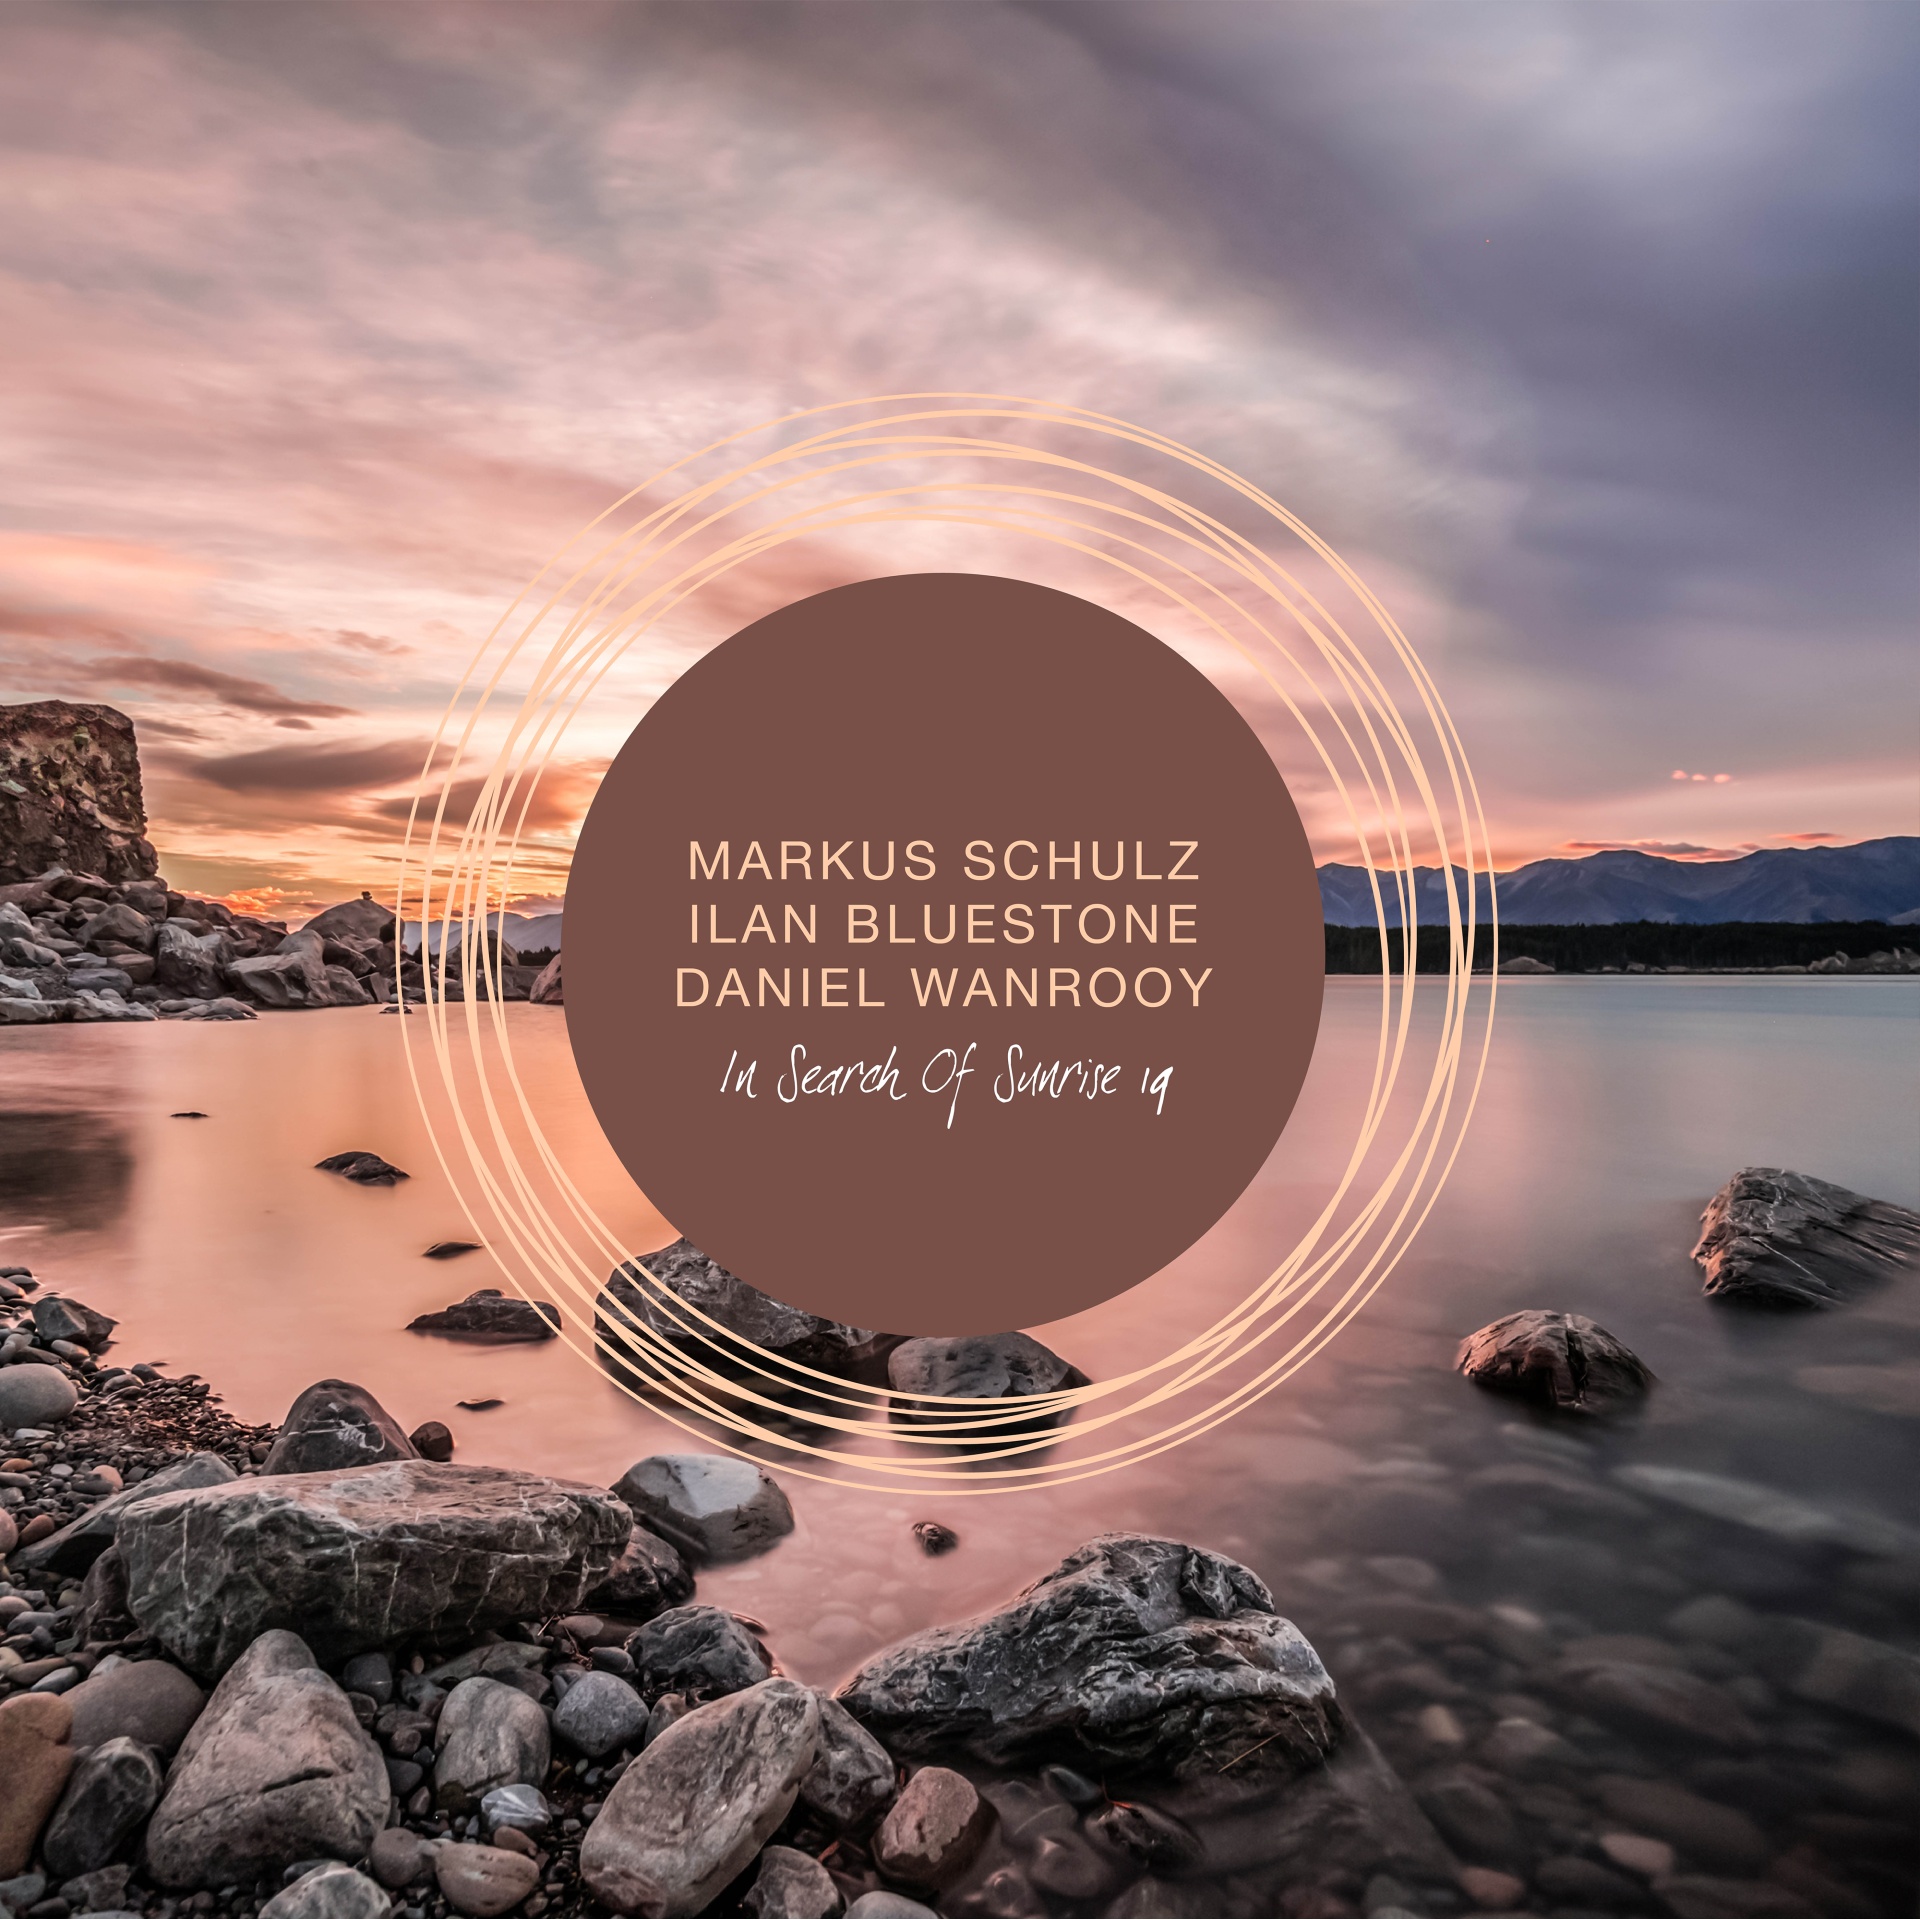 Various Artists presents In Search Of Sunrise volume 19 mixed by Markus Schulz, Ilan Bluestone and Daniel Wanrooy on Black Hole Recordings